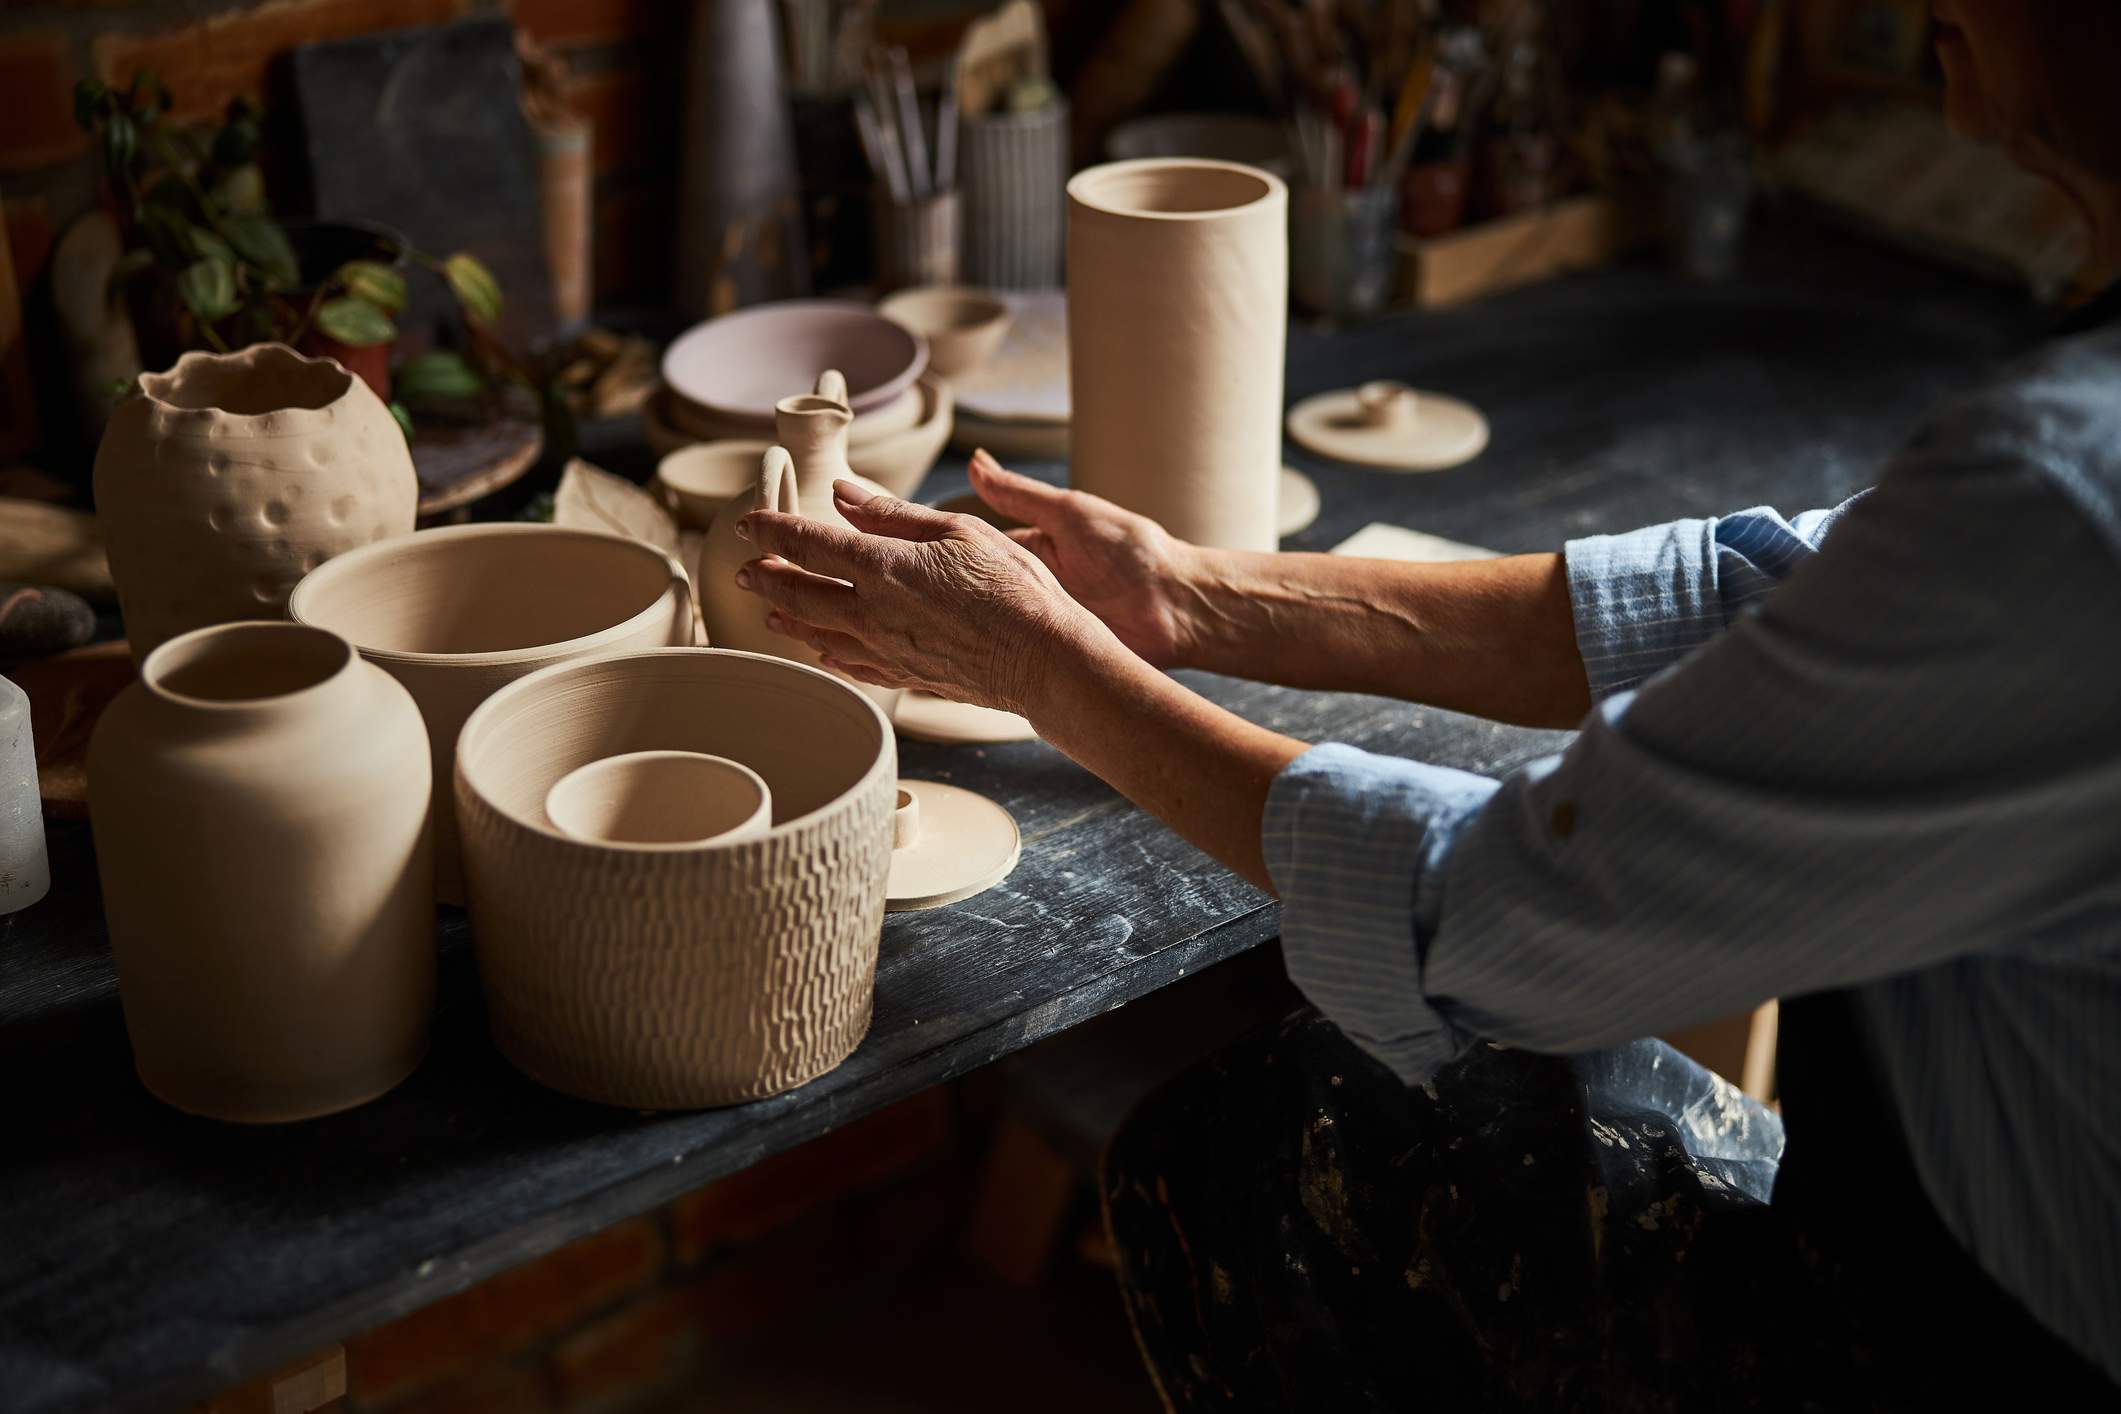 Saturday Morning Pottery Club: Self-Directed, Drop-In Sessions for Adults/teens